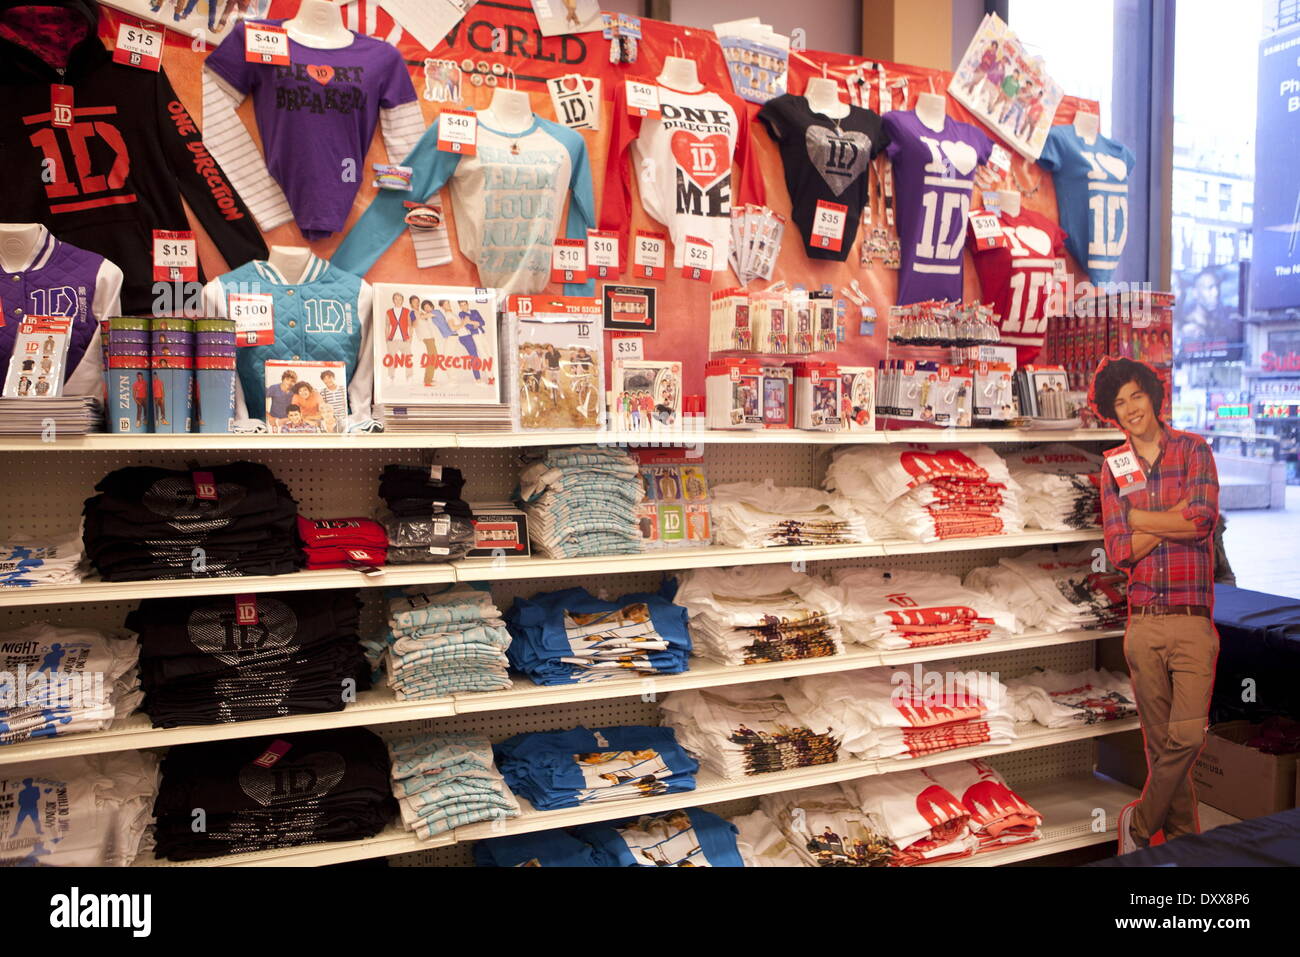 One Direction fans visit the new '1D World' Pop Up Store where they can  purchase merchandise and write messages to their favorite band member  throughout the store Featuring: One Direction fans visit